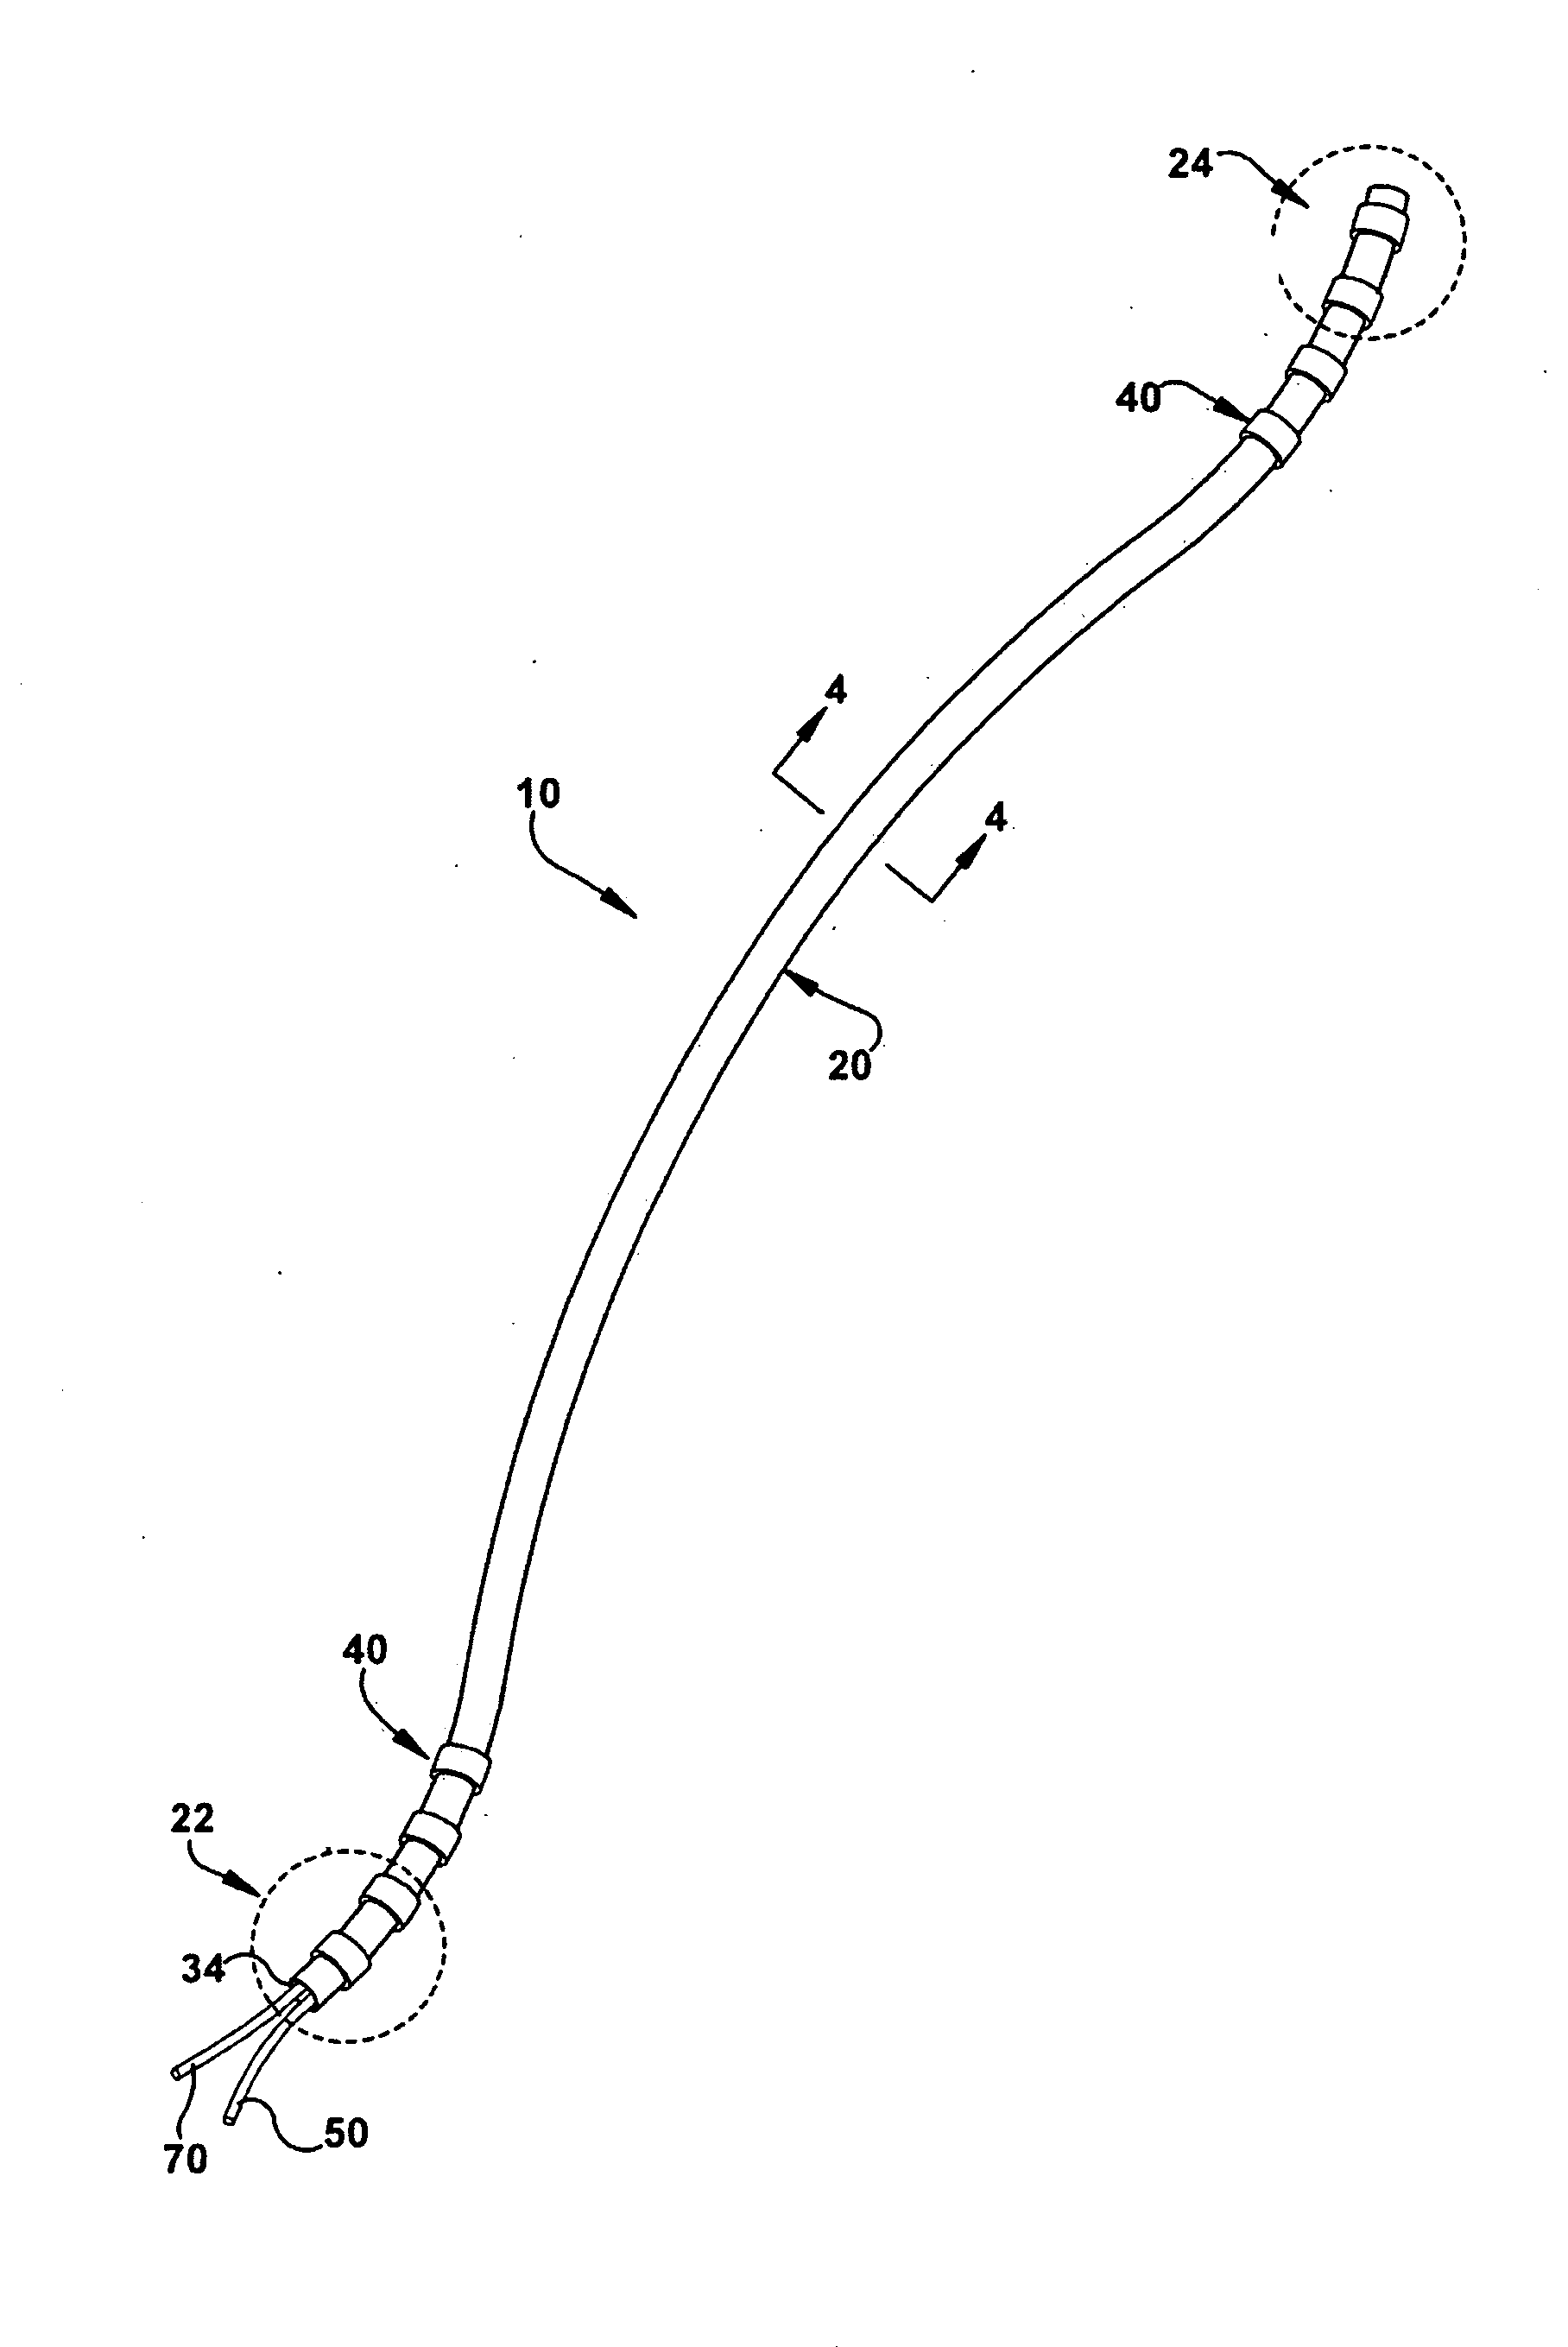 Method and apparatus for securing a neuromodulation lead to nervous tissue or tissue surrounding the nervous system